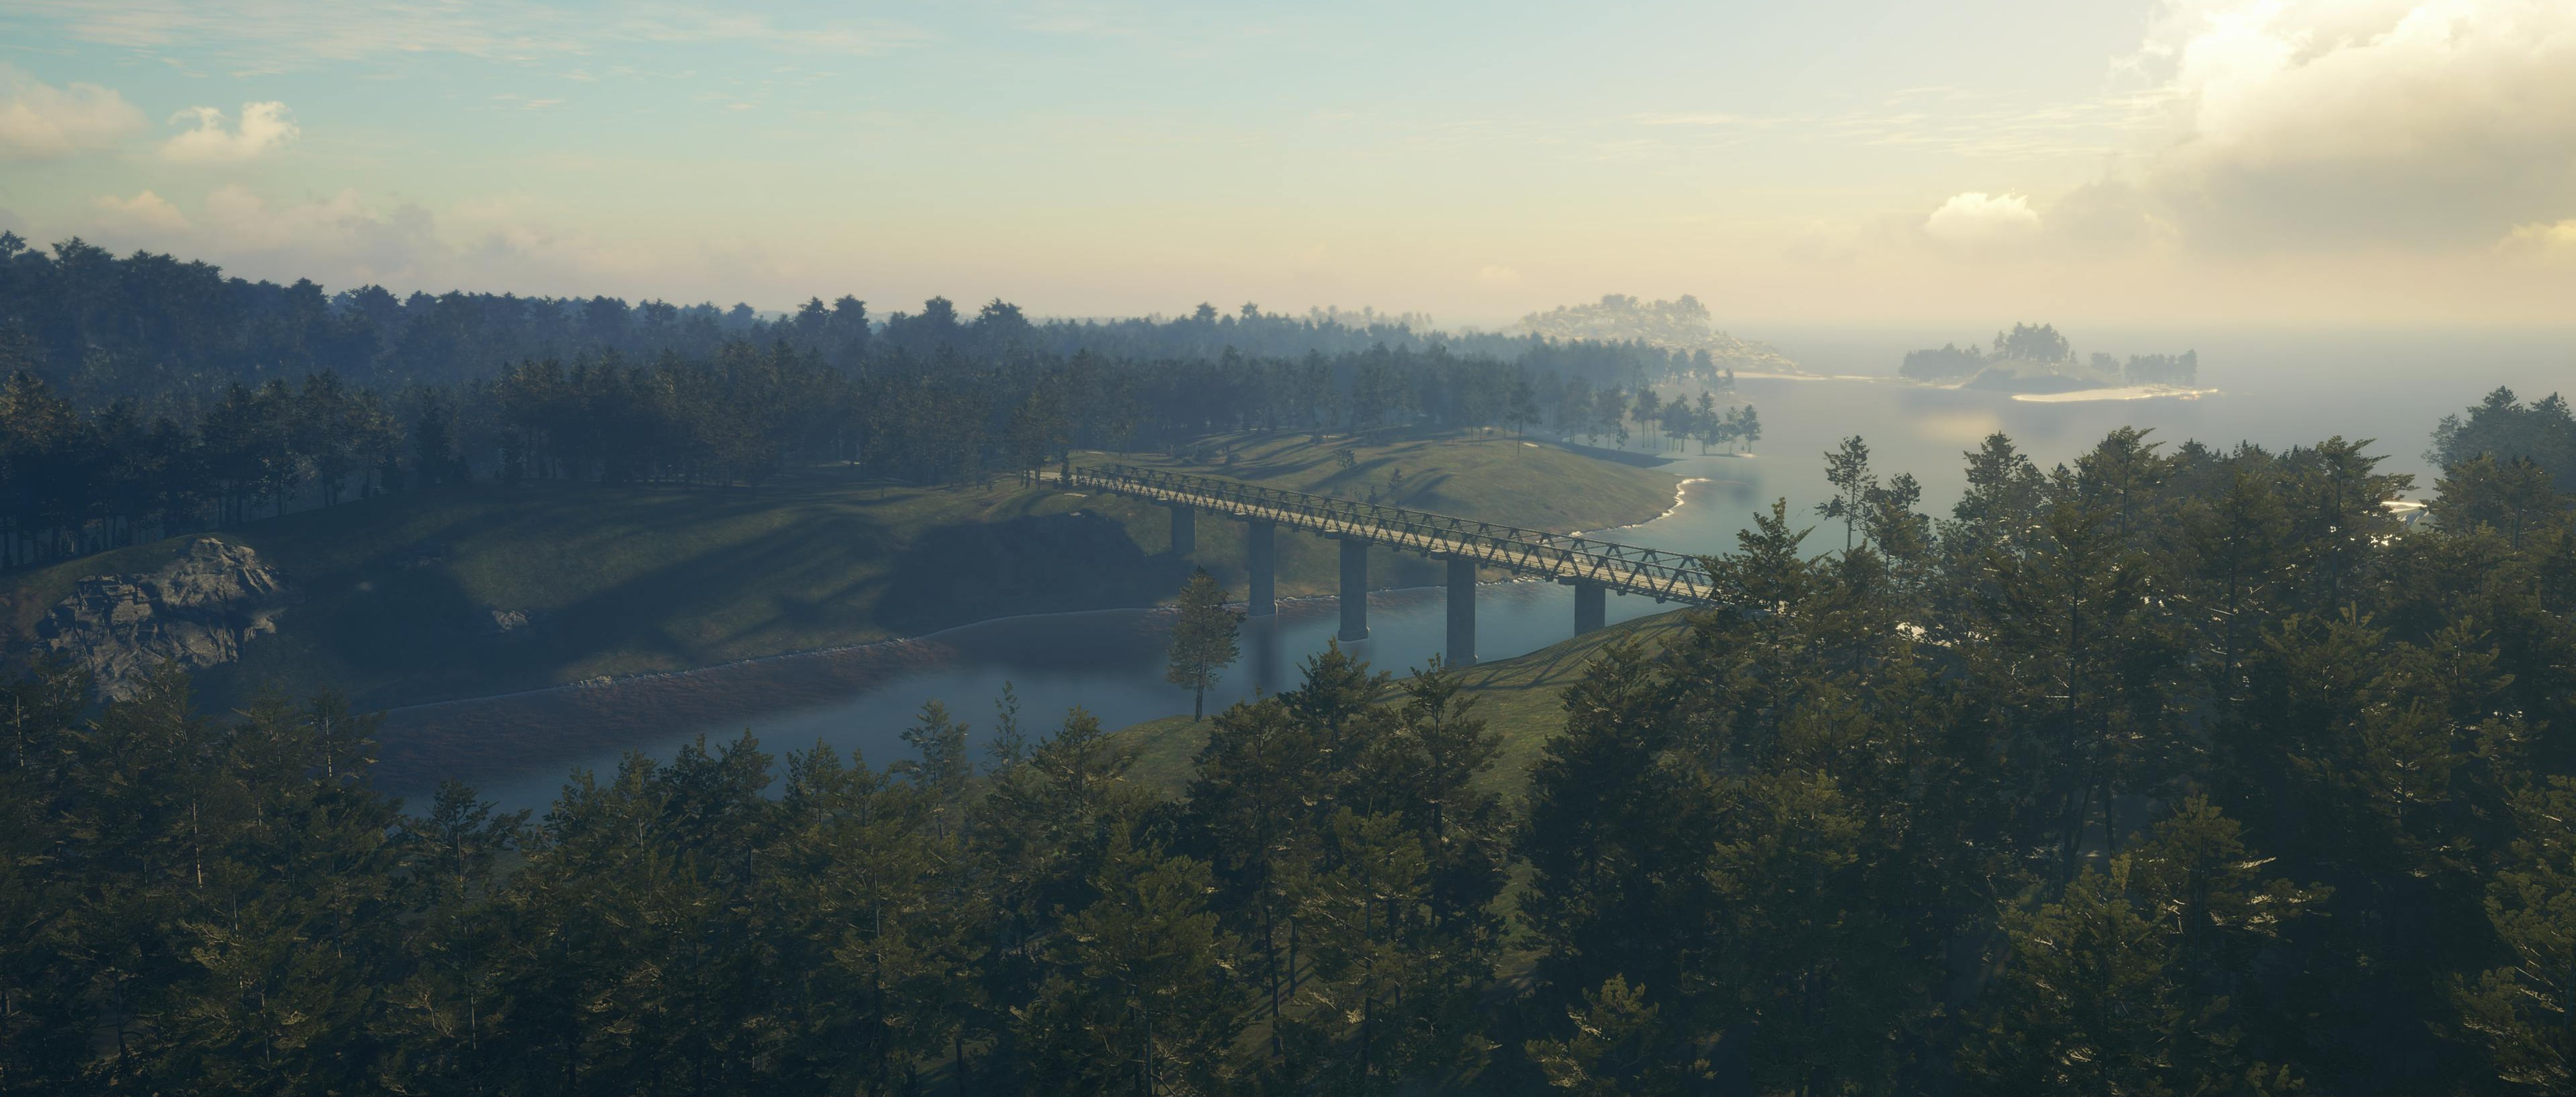 Explore Beautiful New Zealand In Thehunter Call Of The Wild Te Awaroa National Park Coming To Pc Steam On December 10 Avalanche Studios Group